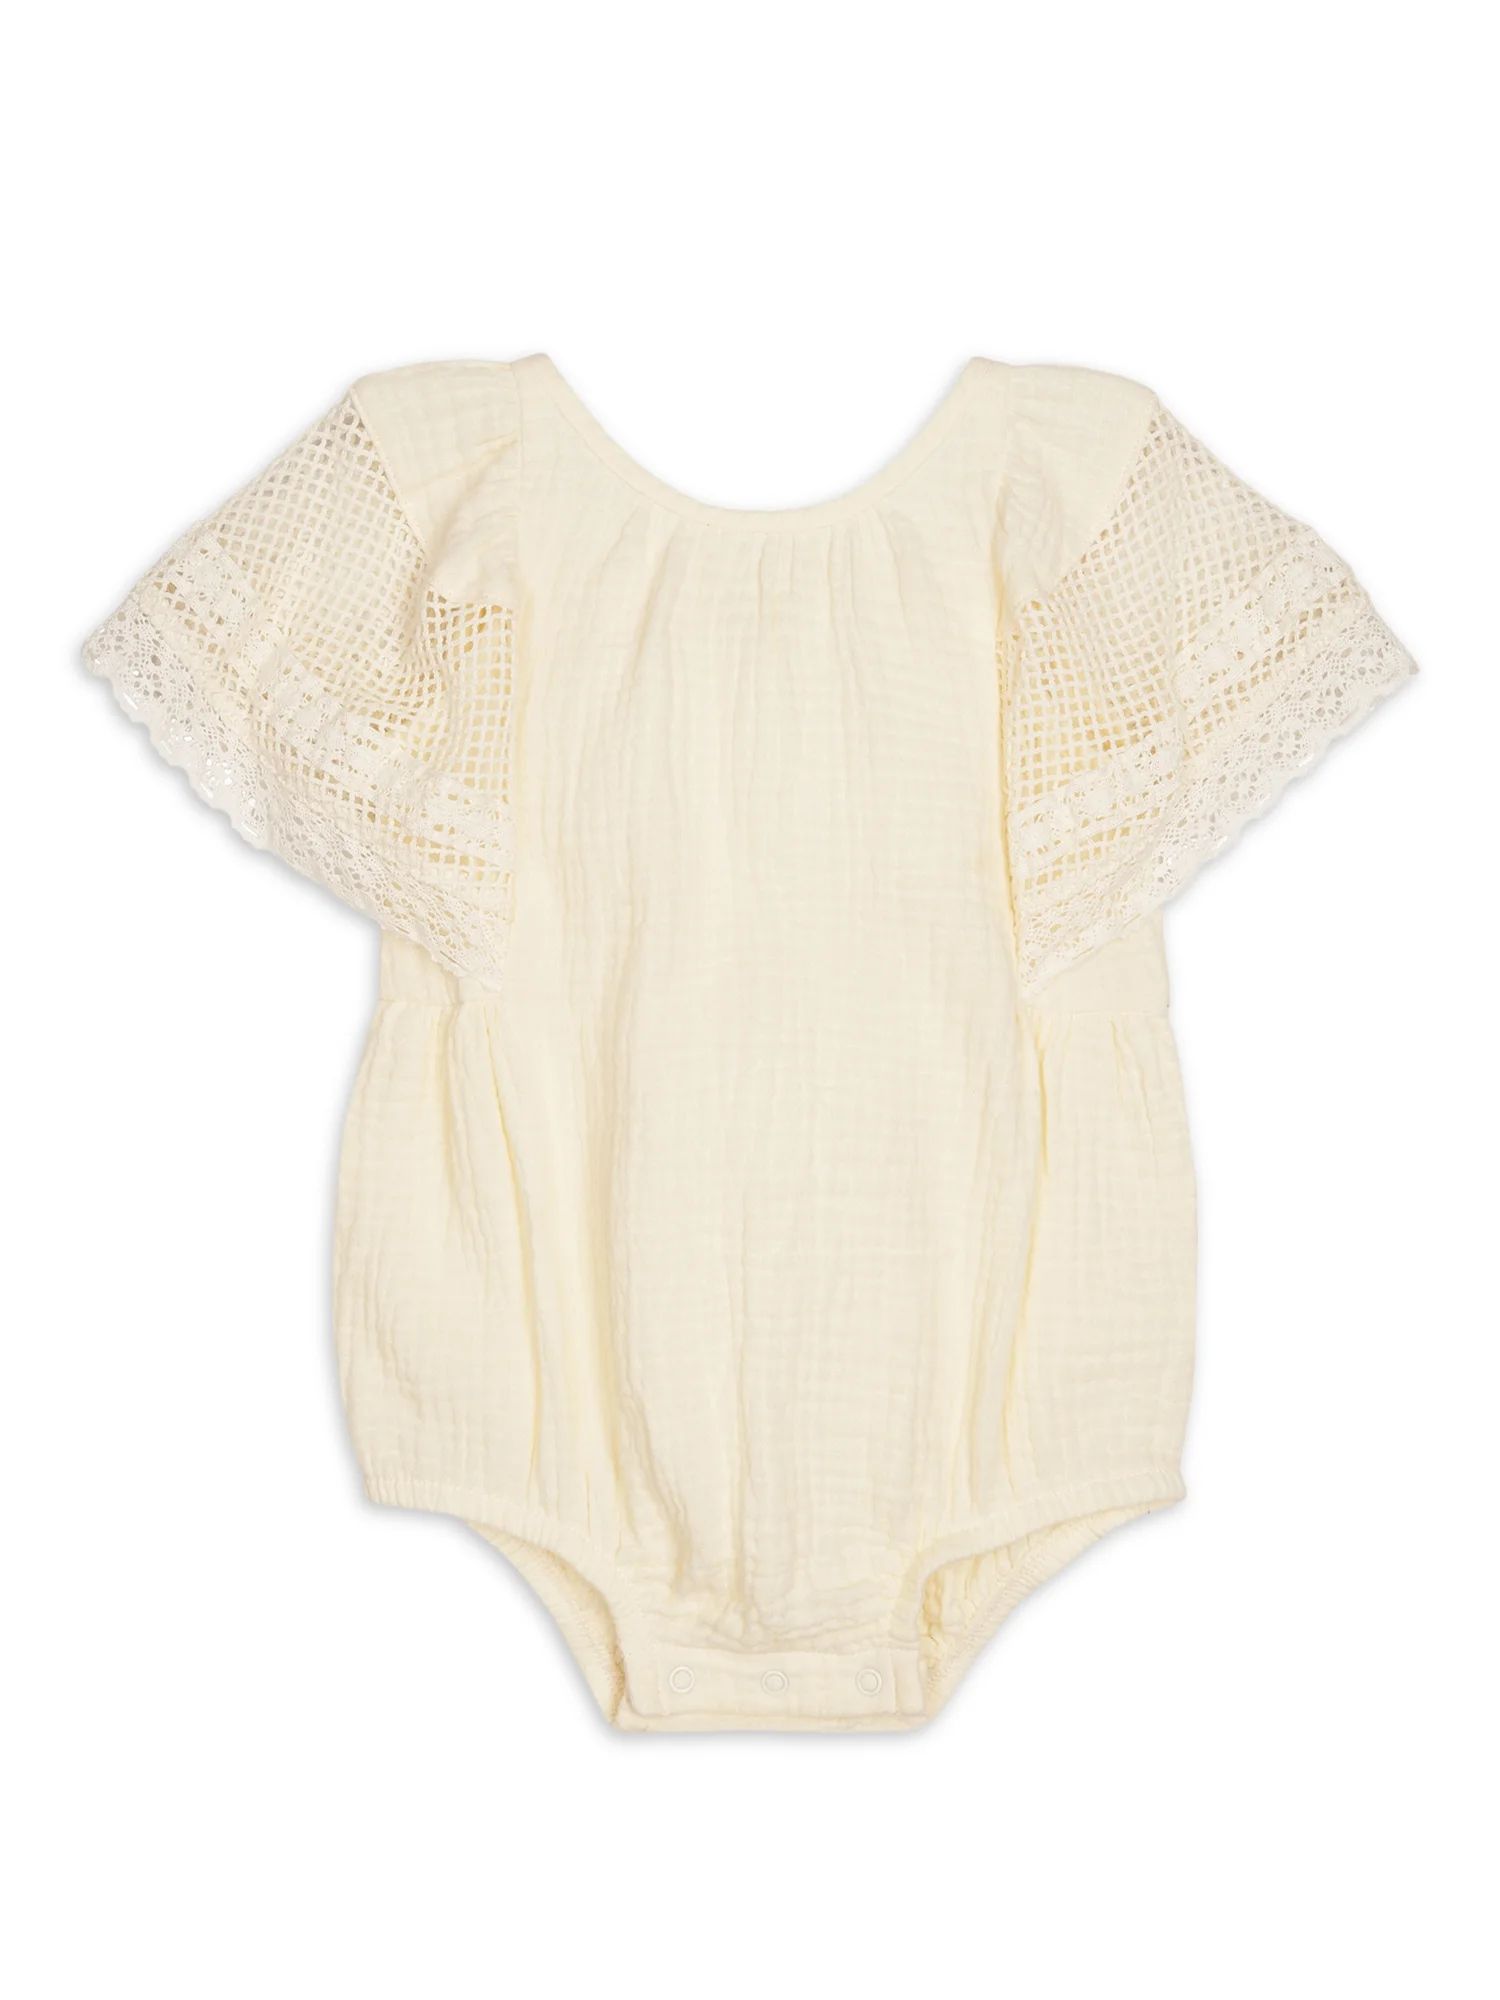 Modern Moments By Gerber Baby Girl Cotton Romper with Lace Sleeves, Sizes 0/3 Months - 24 Months ... | Walmart (US)